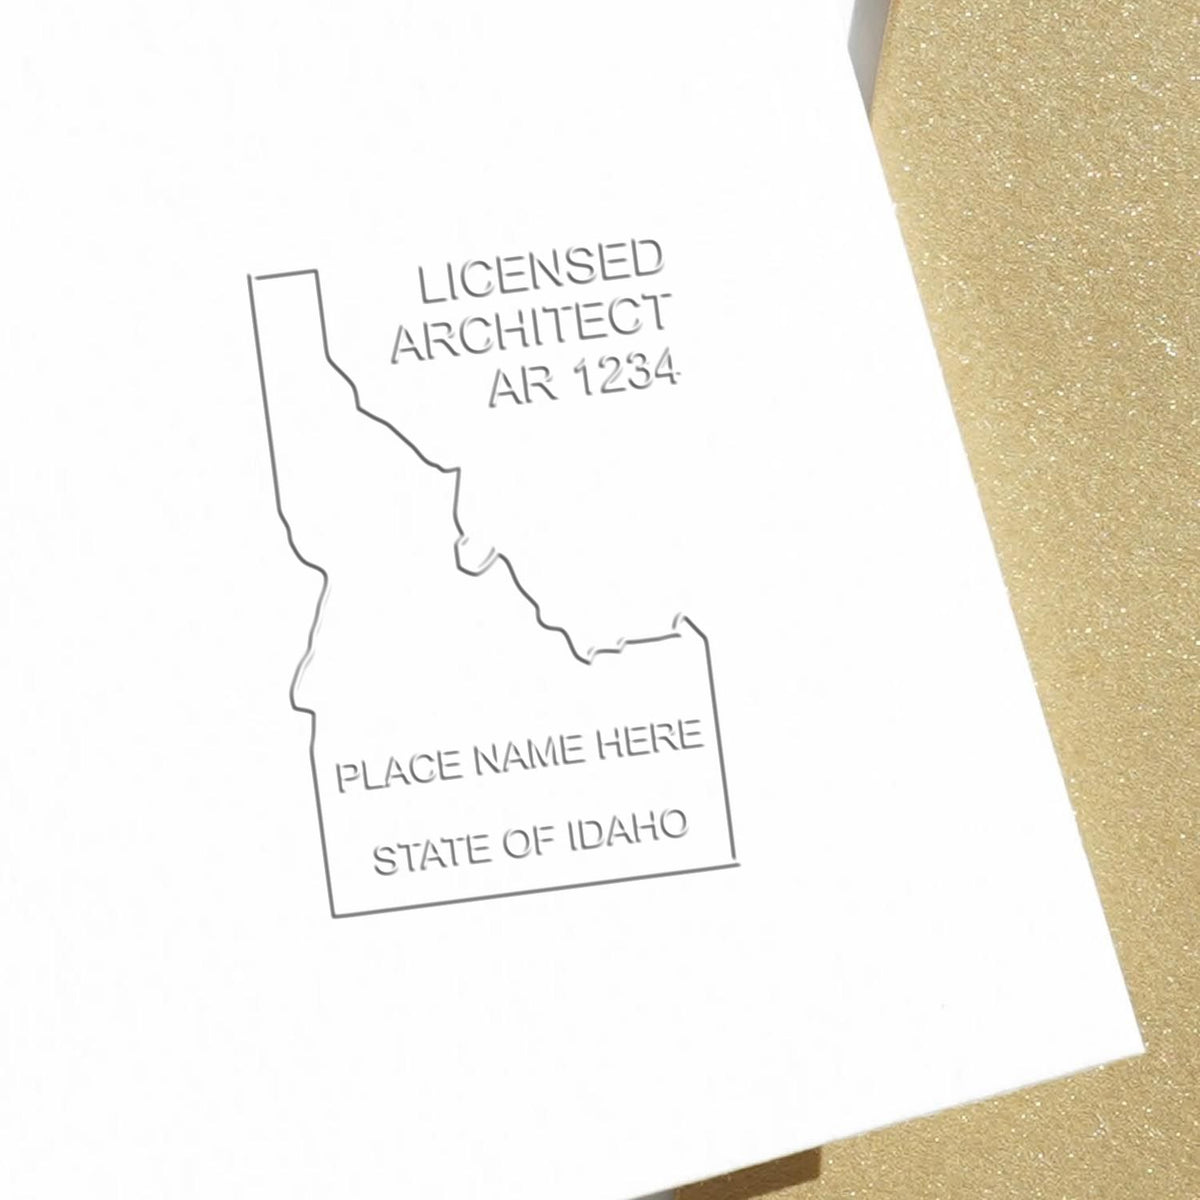 The Gift Idaho Architect Seal stamp impression comes to life with a crisp, detailed image stamped on paper - showcasing true professional quality.